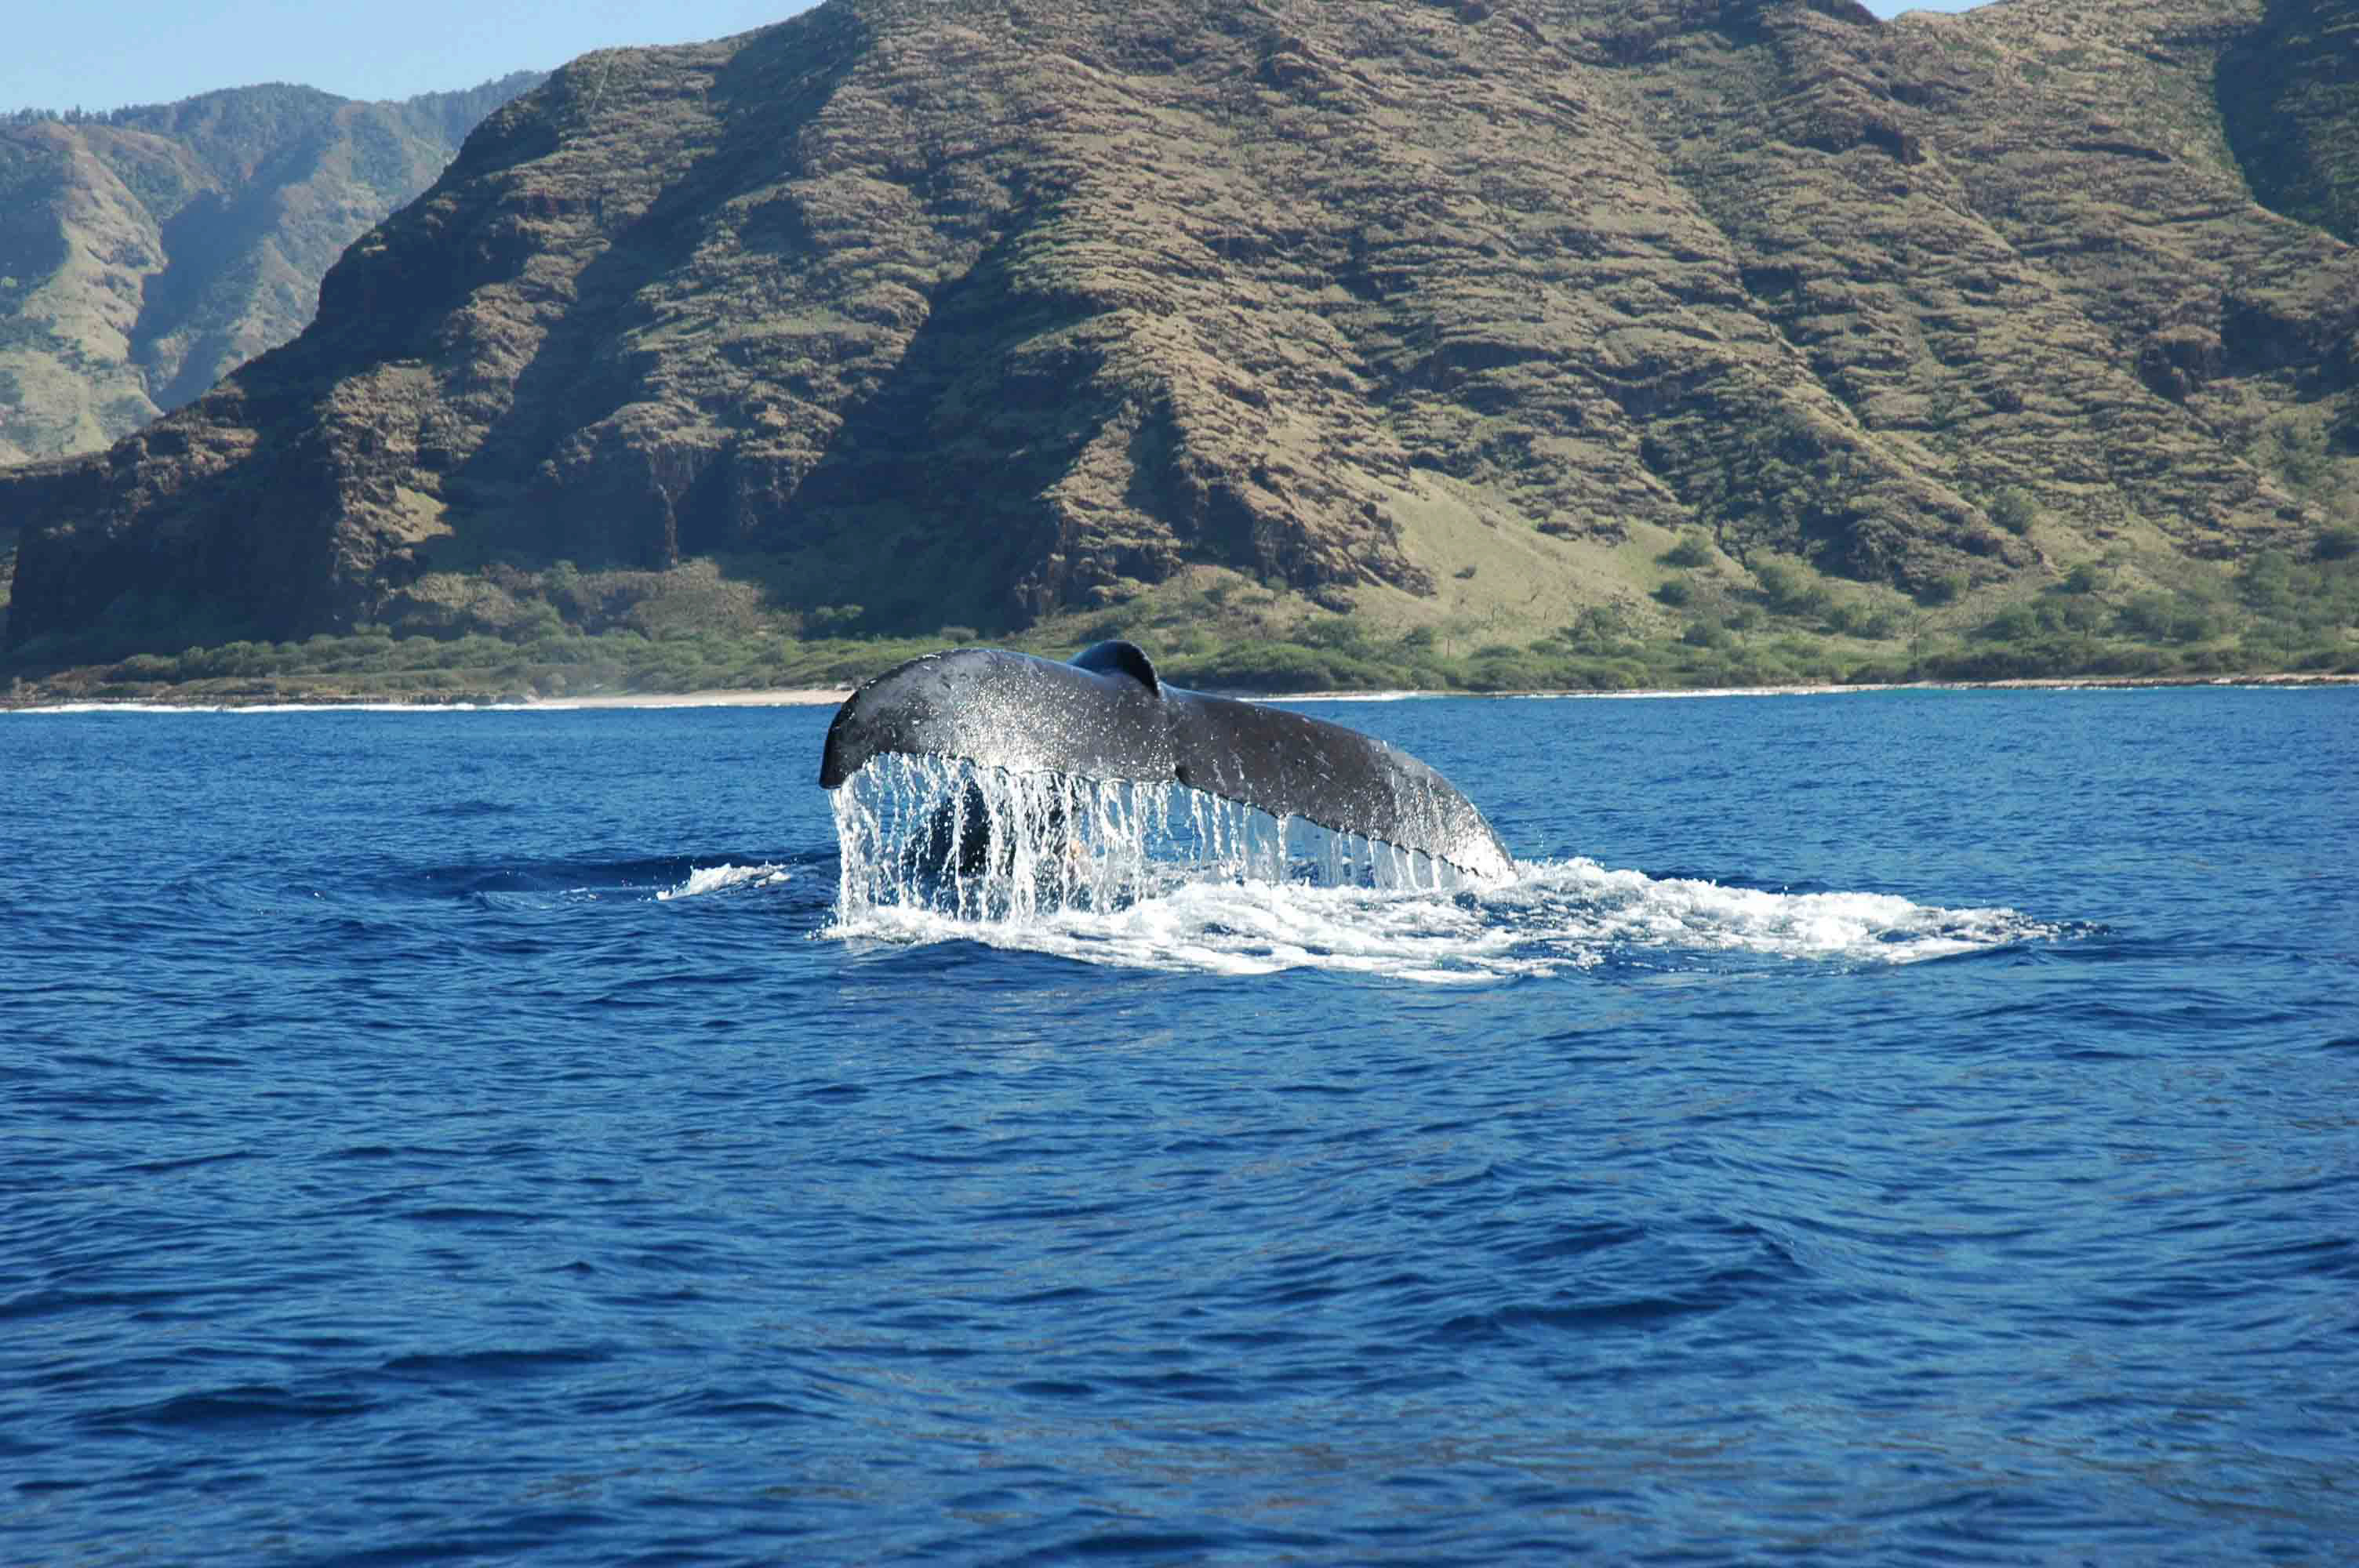 You are currently viewing Hawaii’s Winter Humpback Whale Season with Whales and You